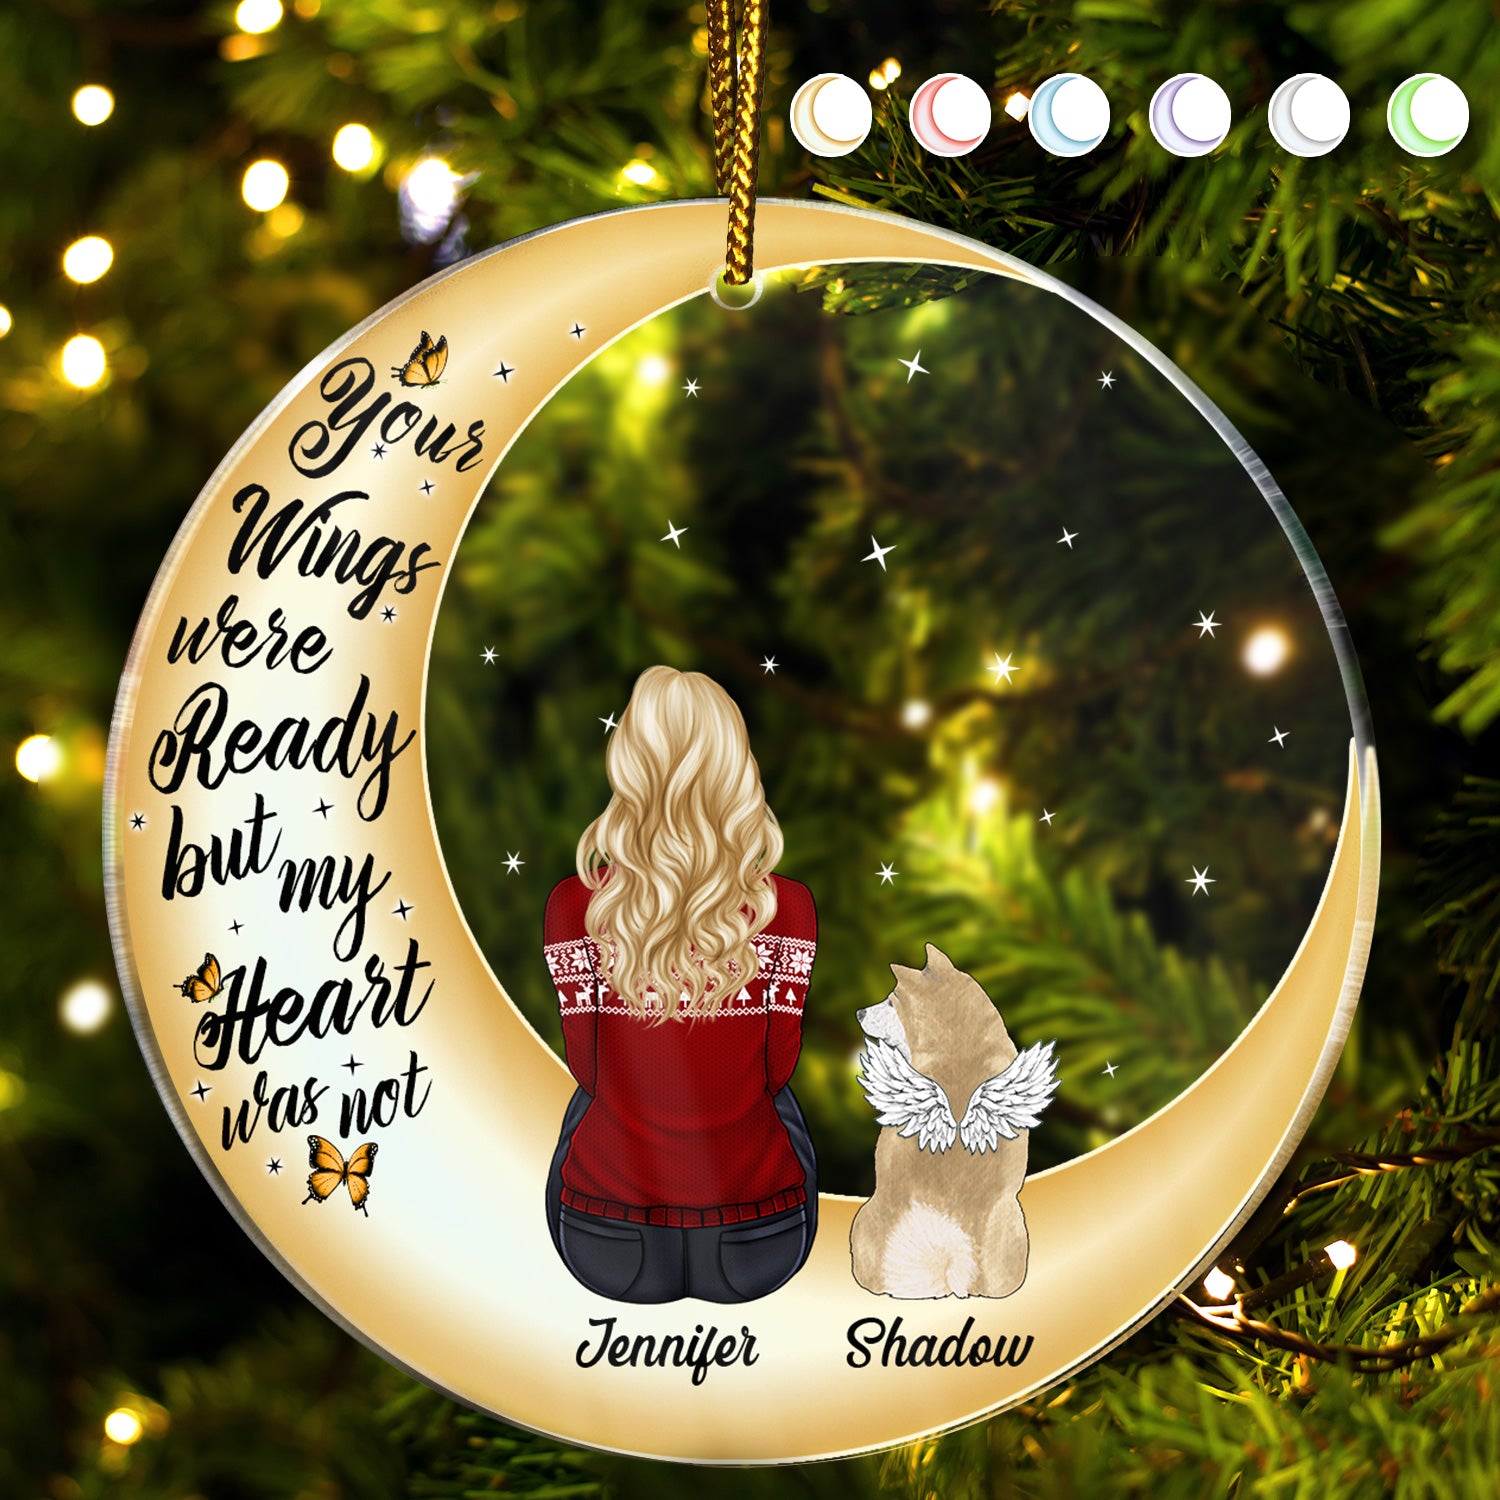 Your Wings Were Ready But My Heart Was Not - Christmas Memorial Gift For Pet Lovers, Dog Mom, Dog Dad, Cat Mom, Cat Dad - Personalized Circle Acrylic Ornament